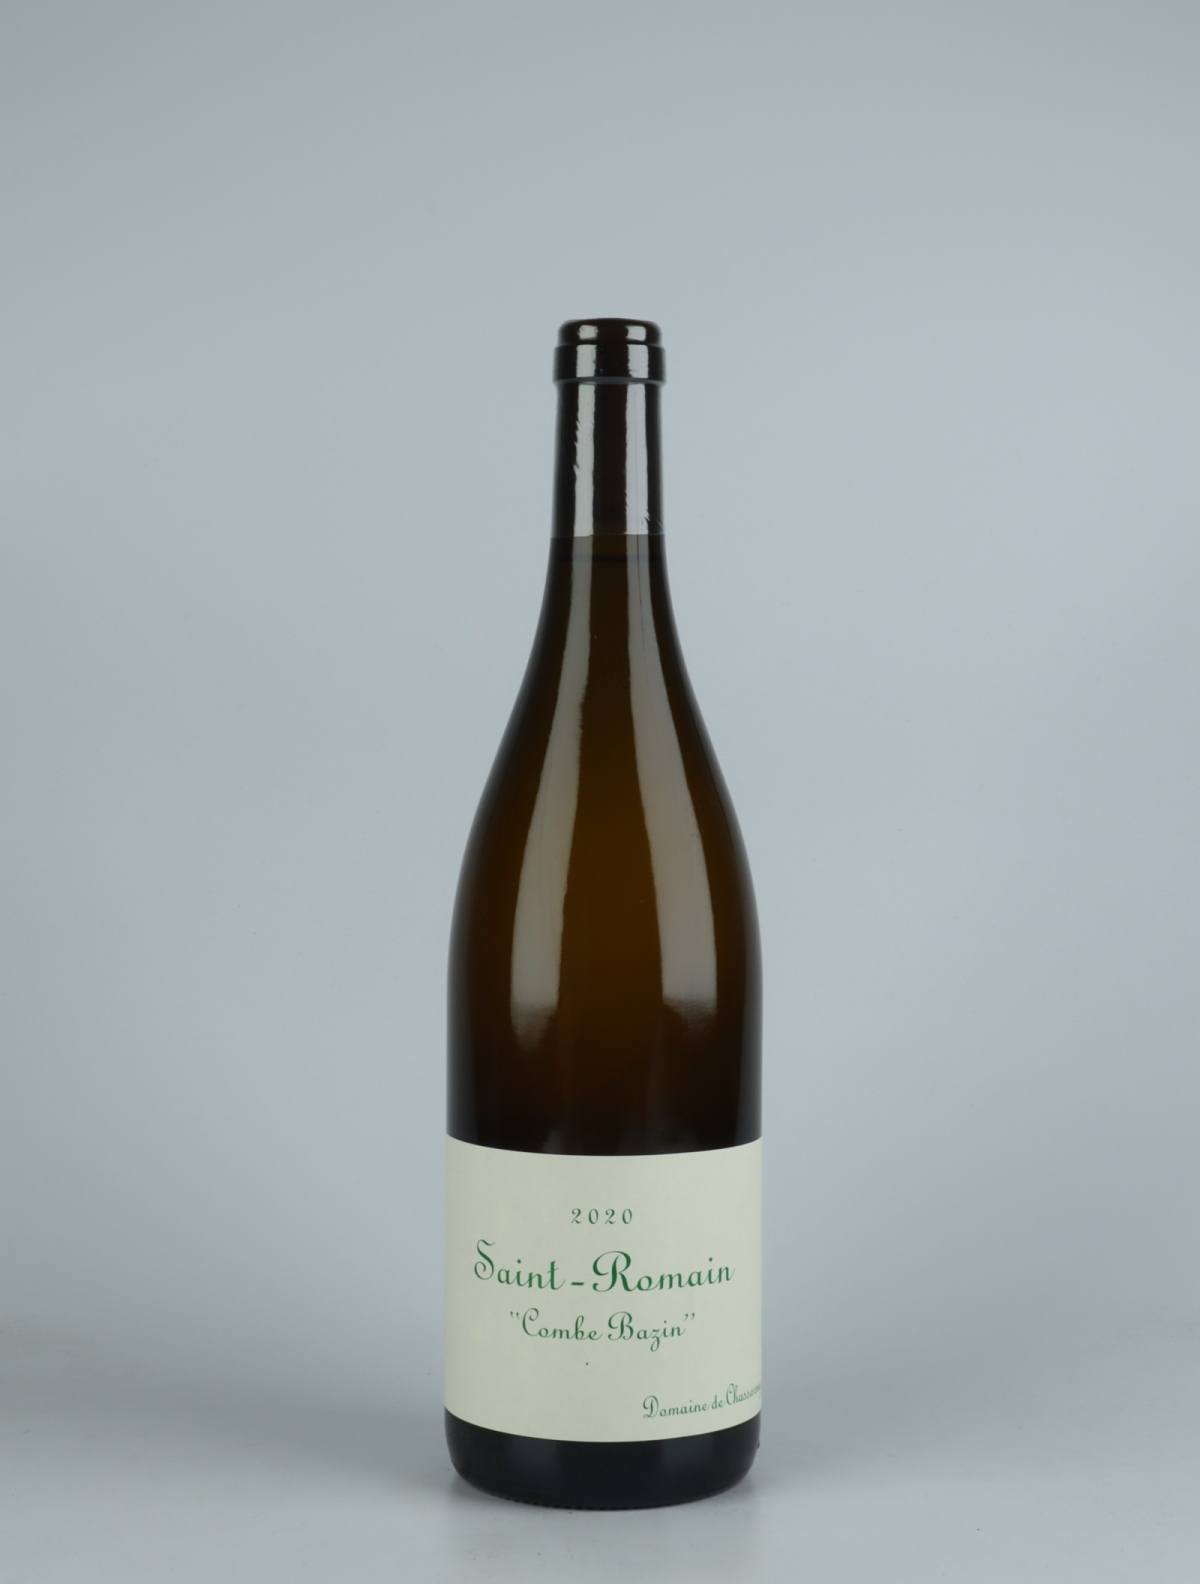 A bottle 2020 Saint Romain Blanc - Combe Bazin White wine from Domaine de Chassorney, Burgundy in France